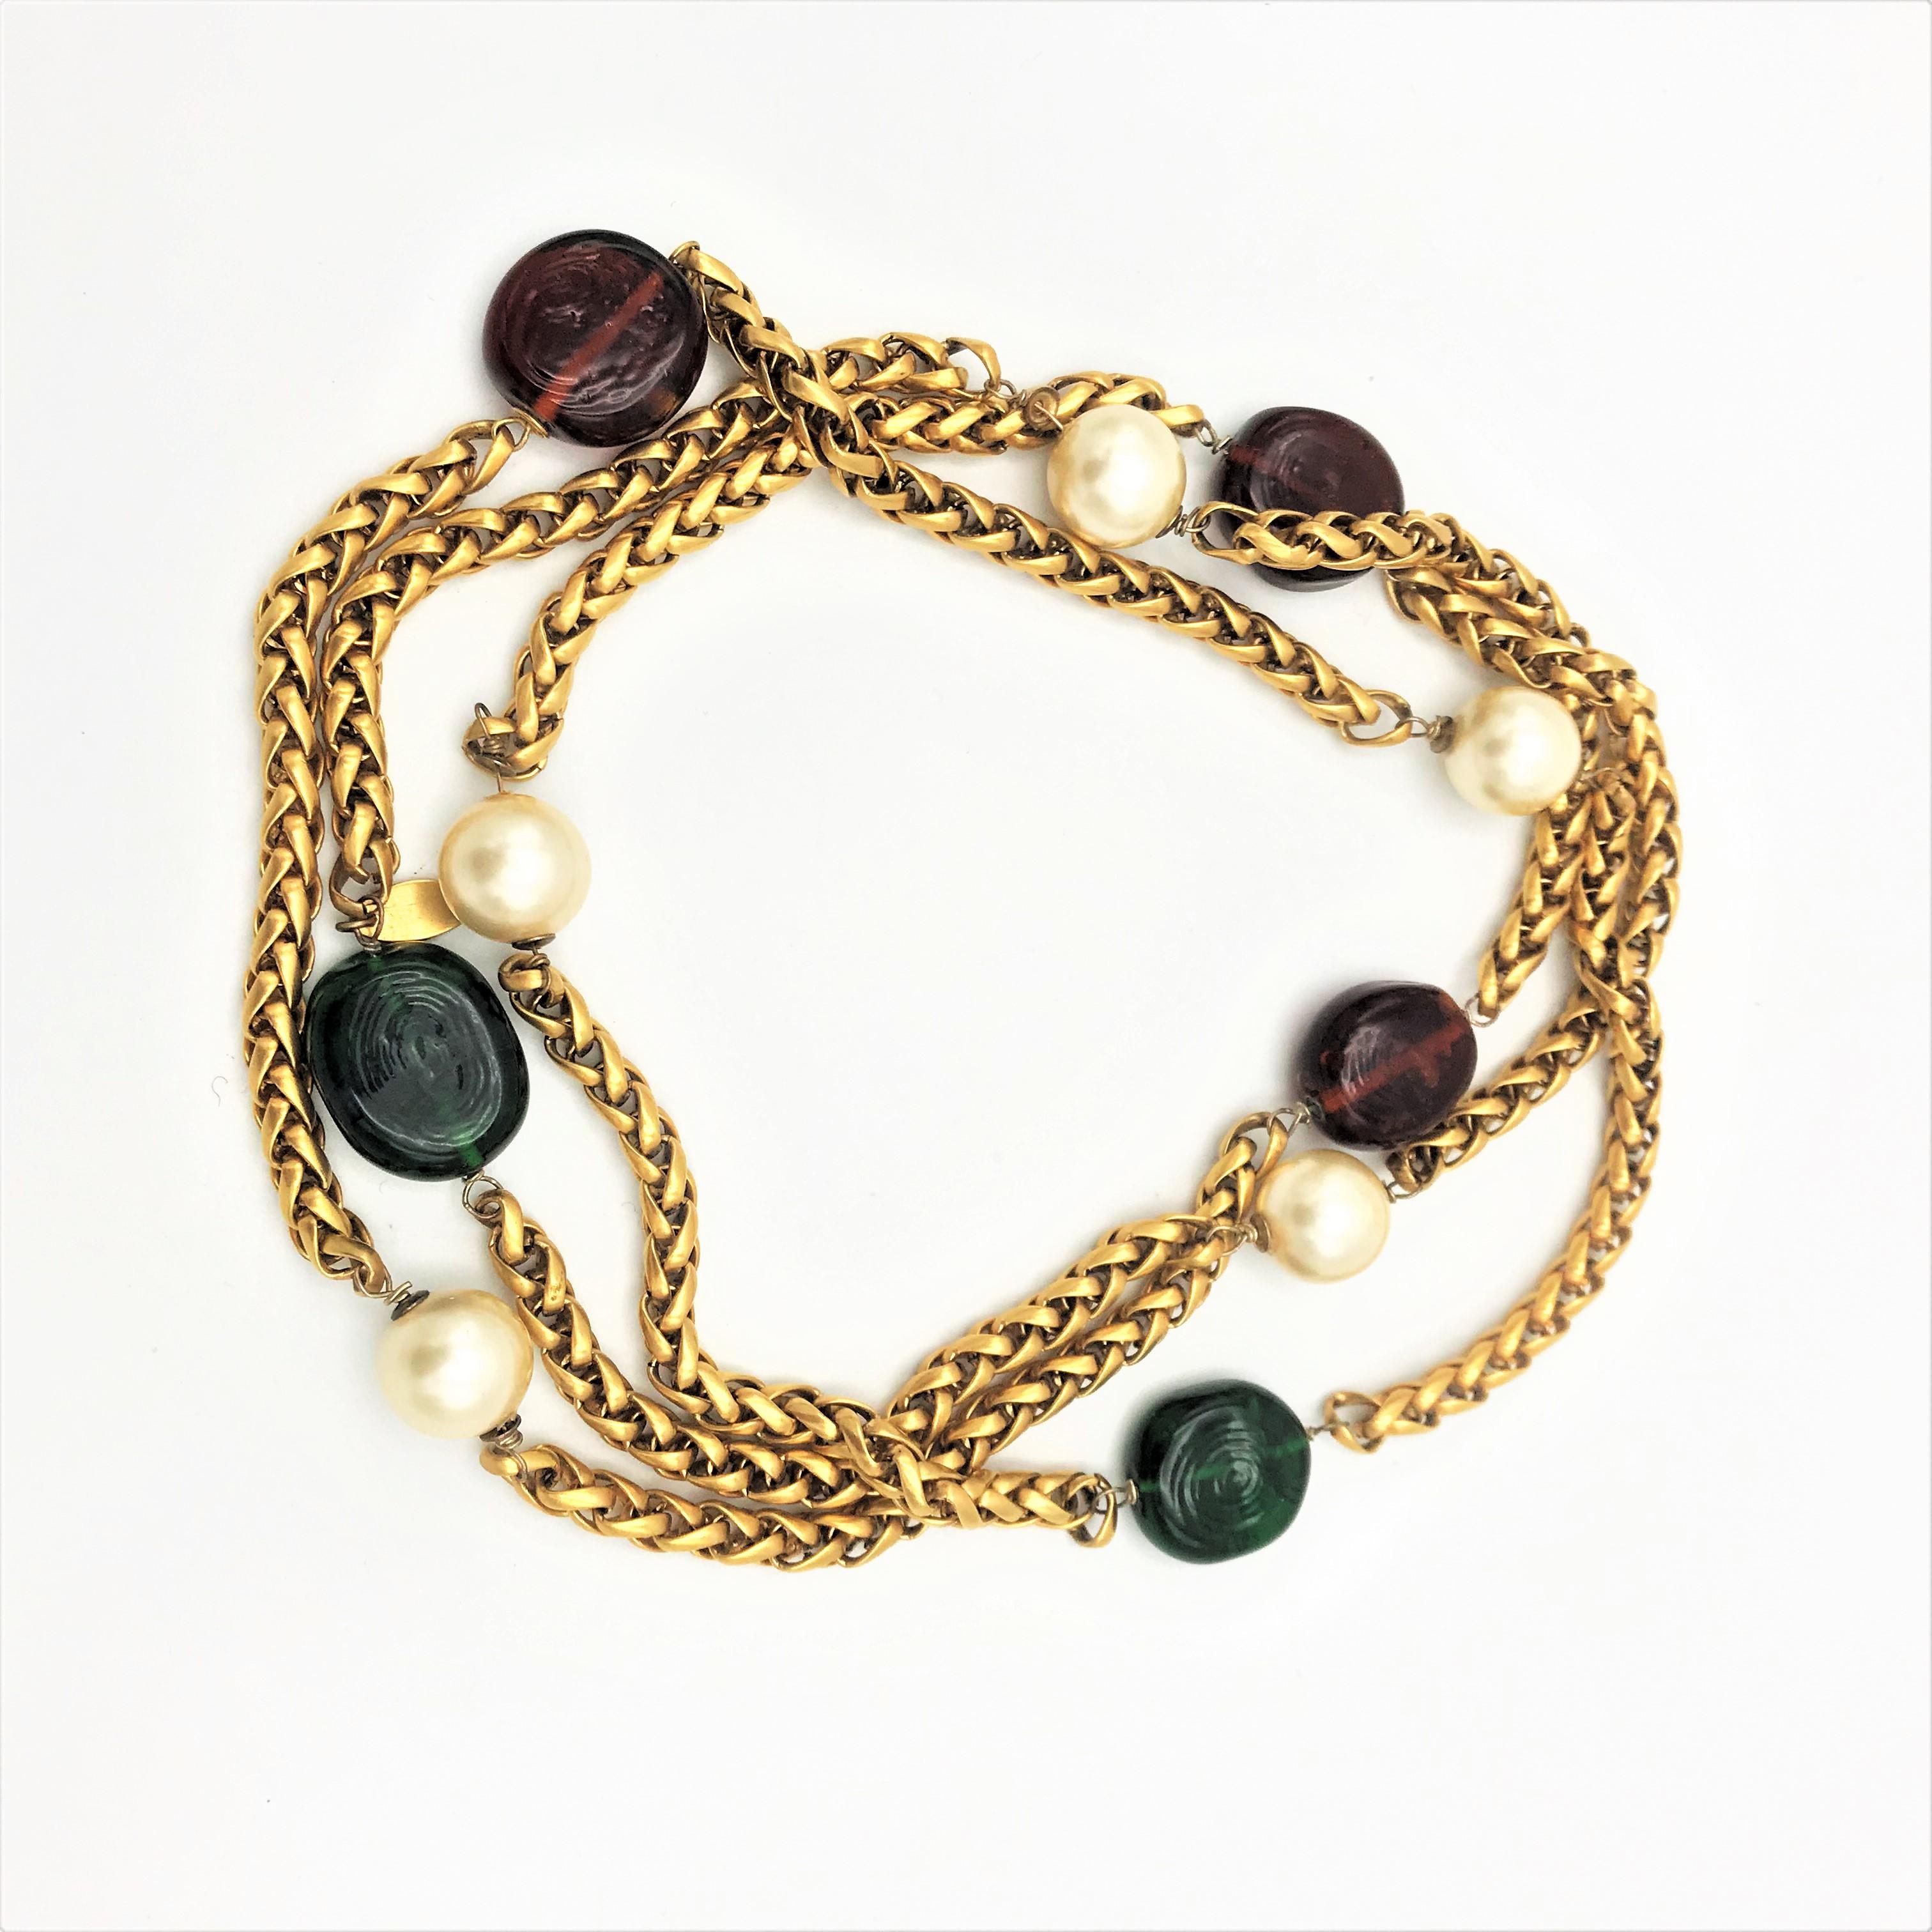 Long 24 carat gold-plated chain between 2 green and 3 red Gripoix flat thalers and 5 beautiful large false pearls. The necklace  was designed by Victoire de Castellan in the 1985 years. 2CC3 was her first collection.
Measurement:  the length double